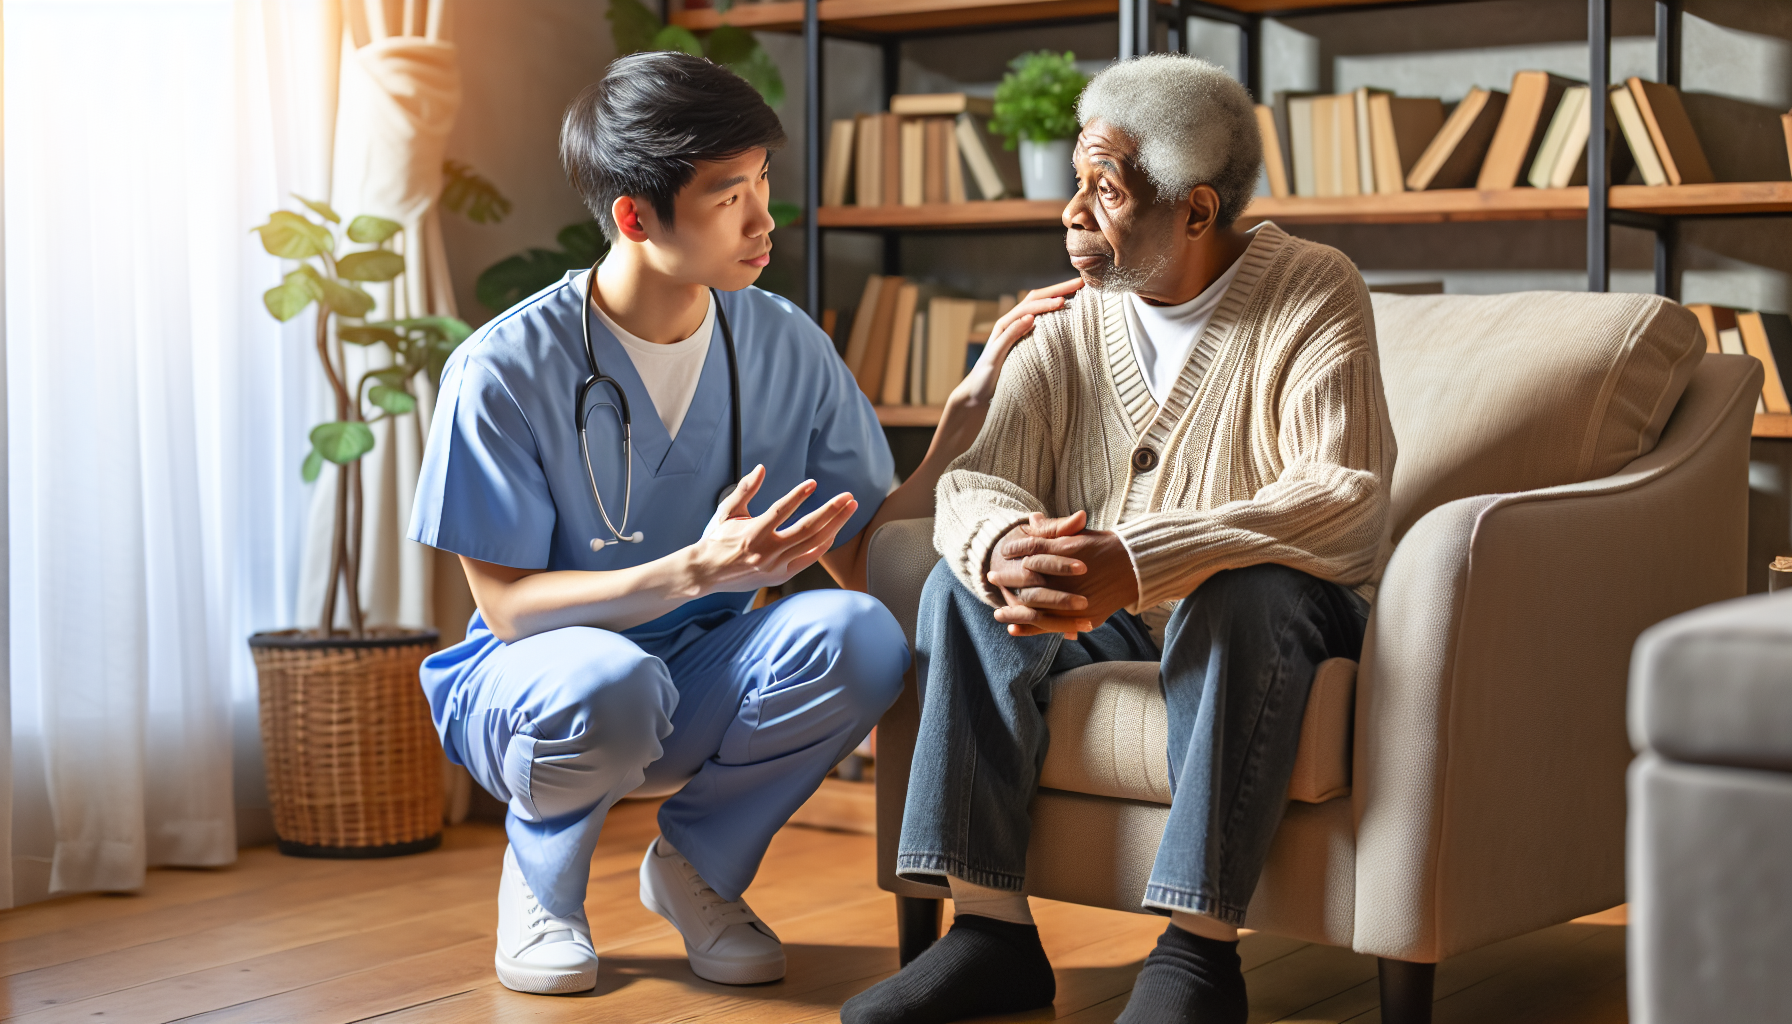 A home health aide communicating effectively with a patient